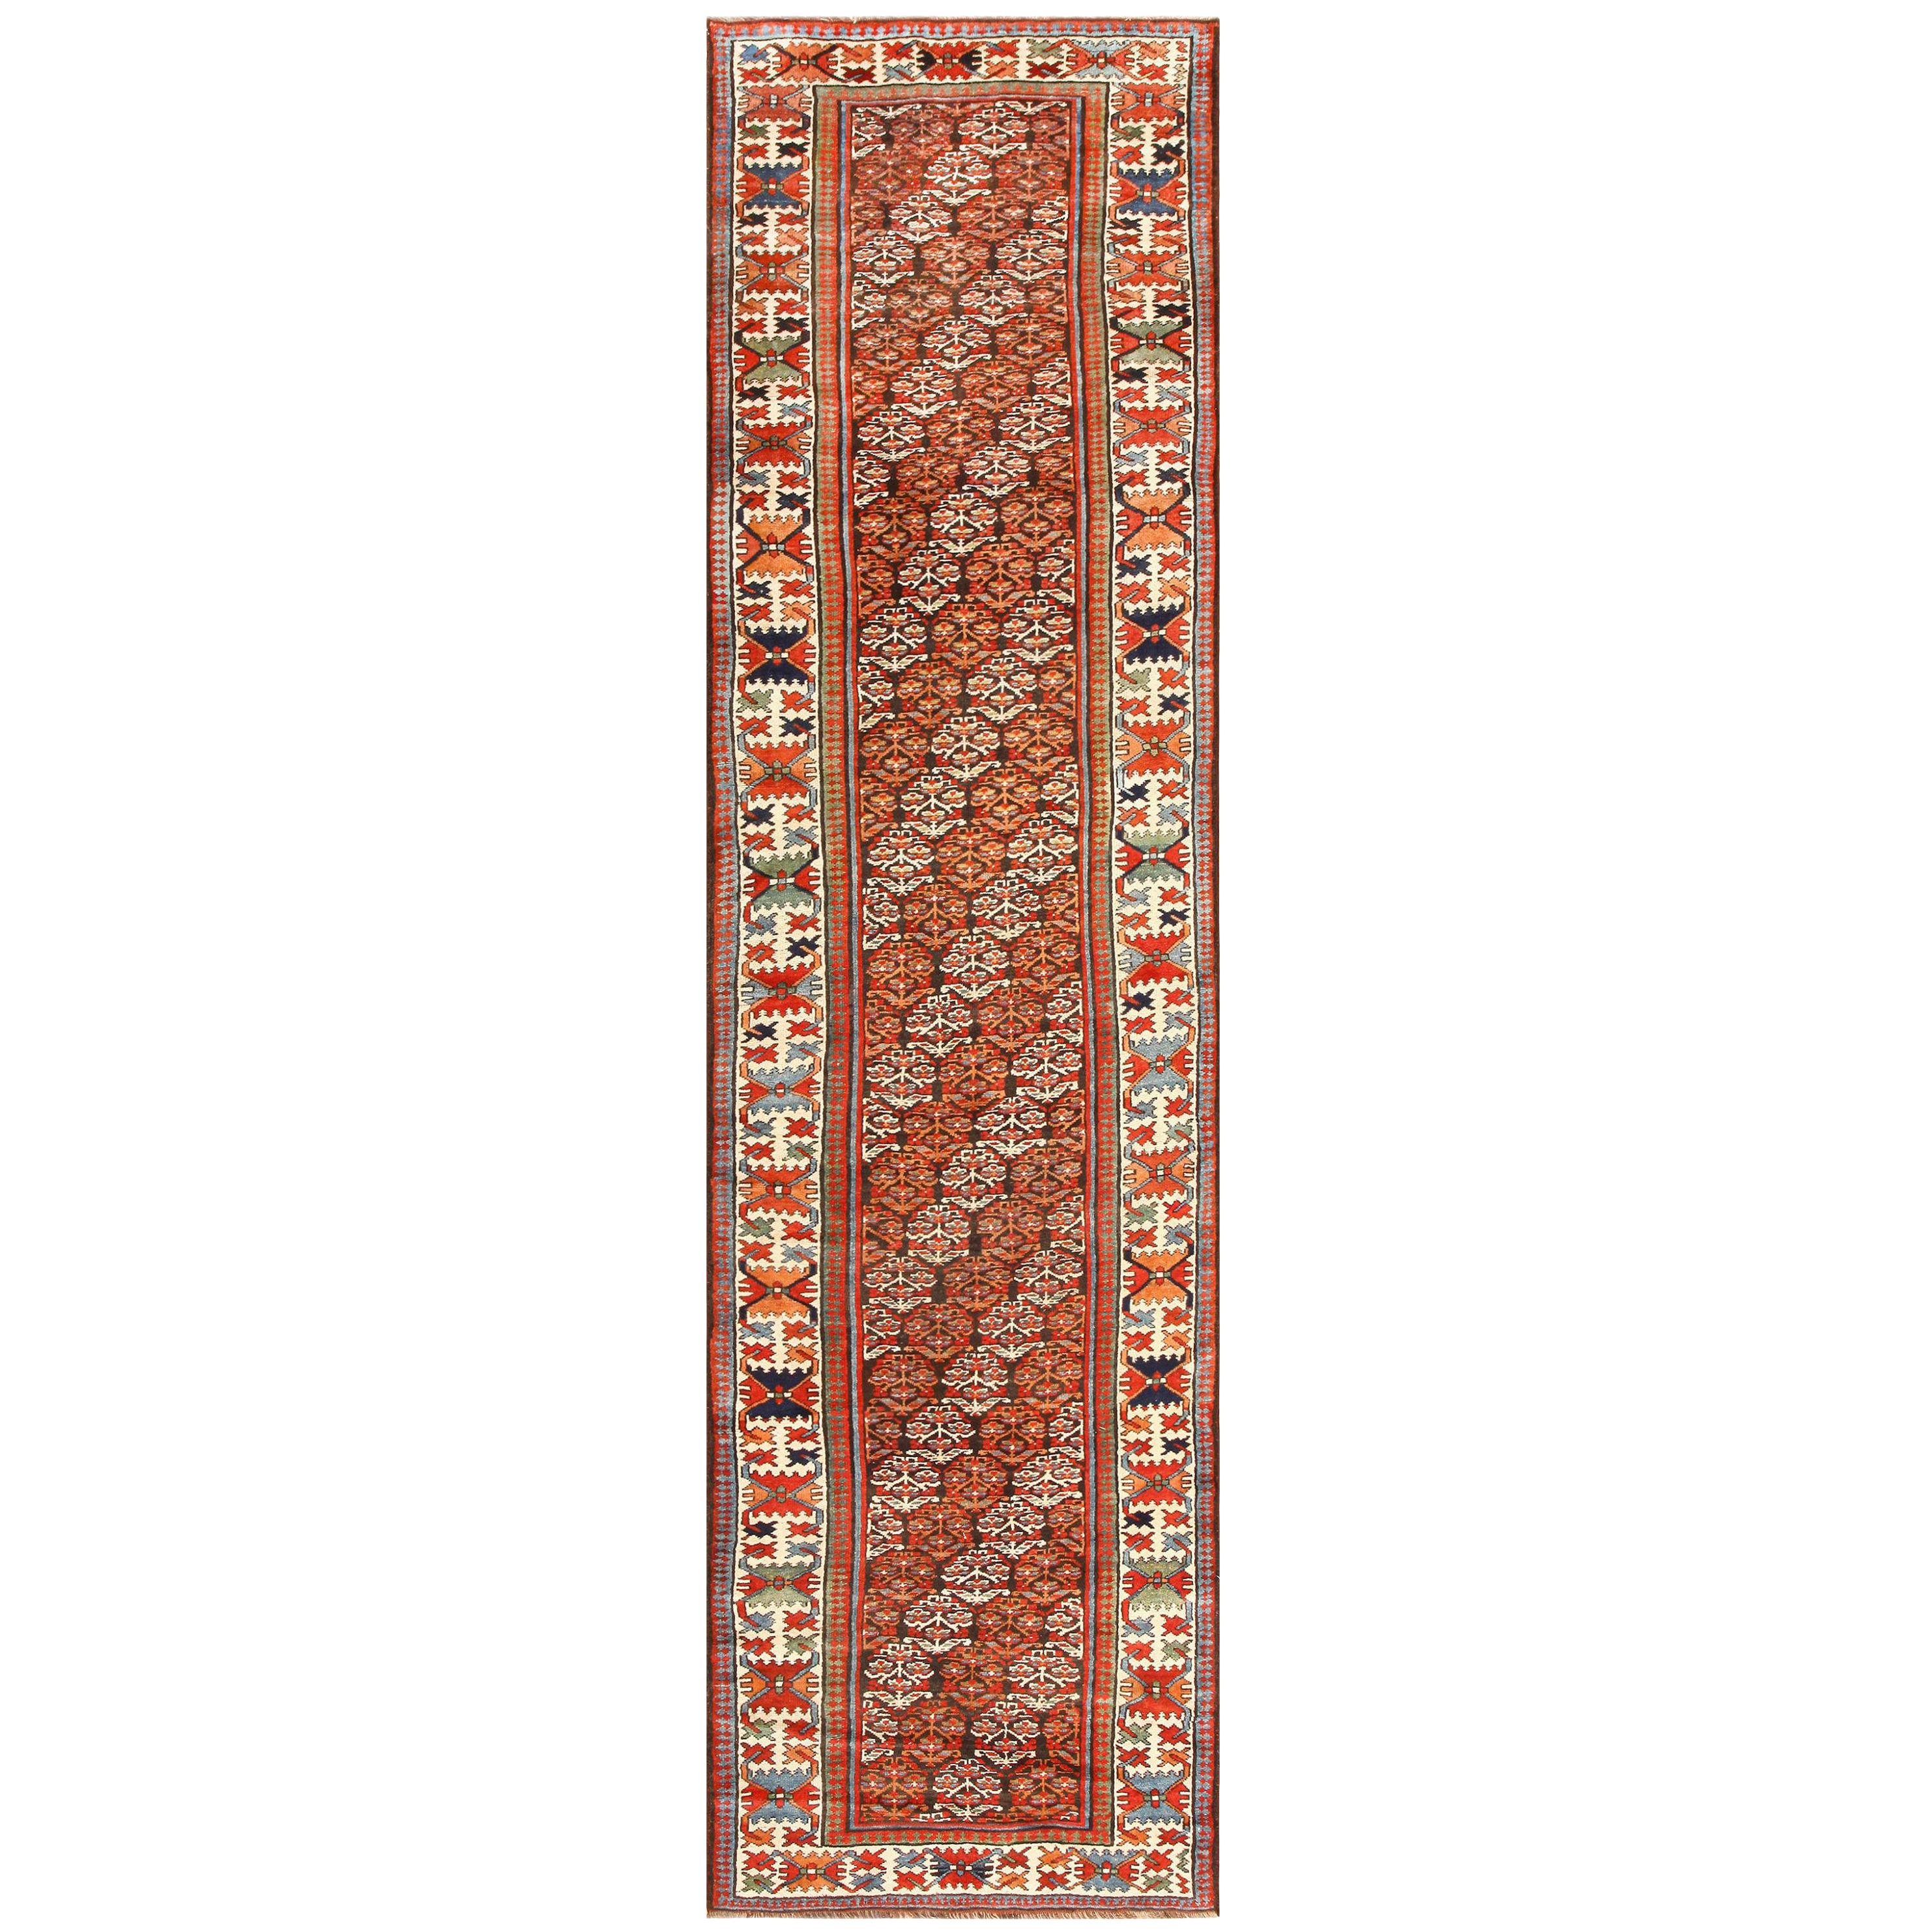 Nazmiyal Antique Tribal Northwest Persian Runner. Size: 3 ft 7 in x 13 ft 5 in 